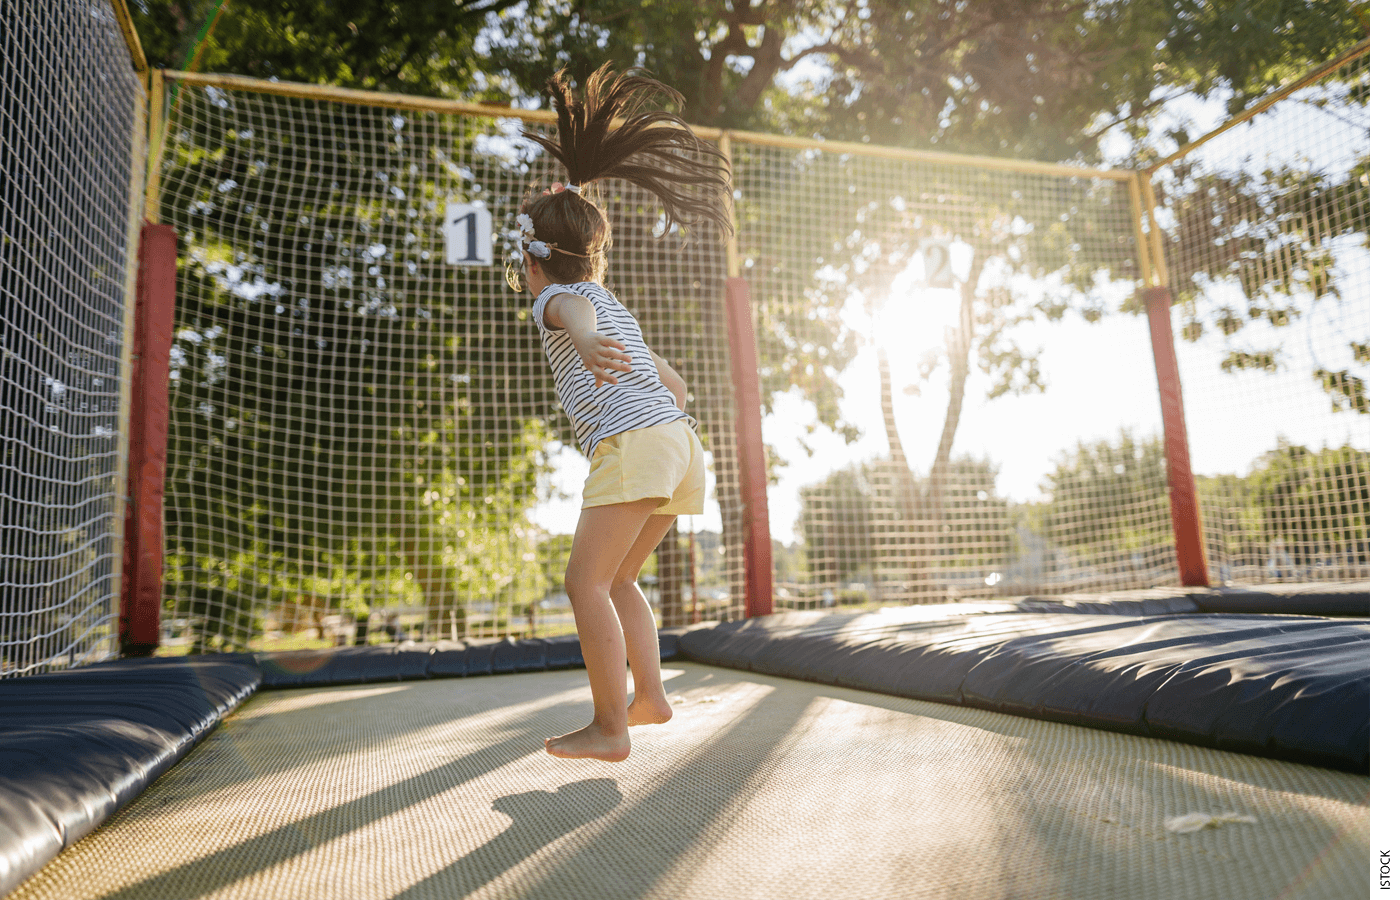 A child playing on a trampoline